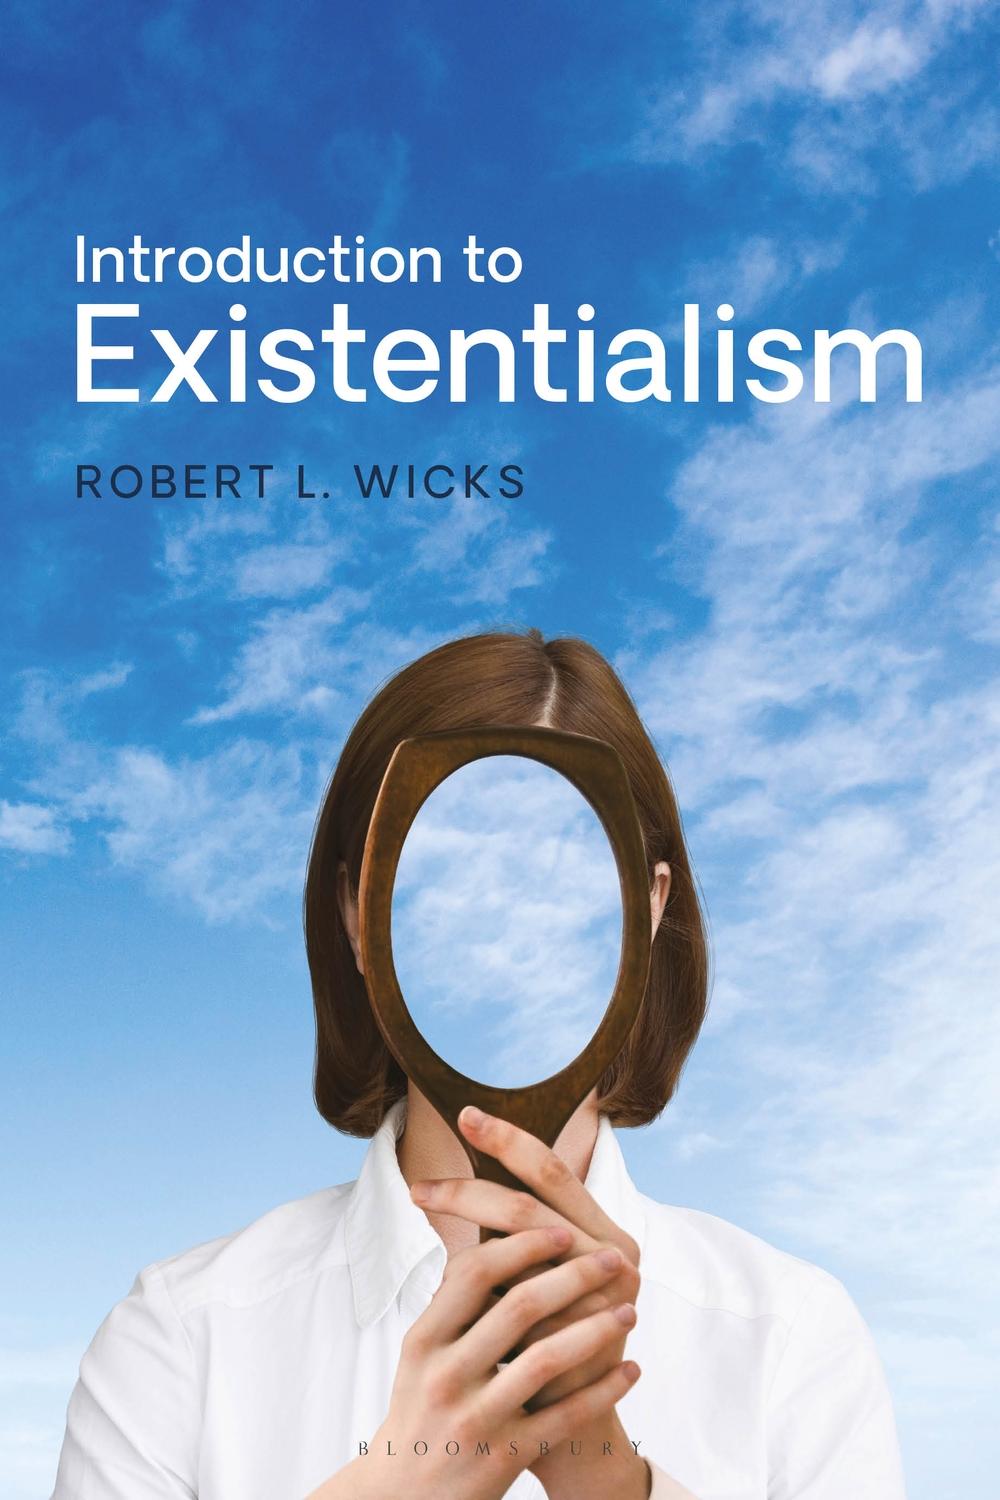 Introduction to Existentialism - Robert L Wicks